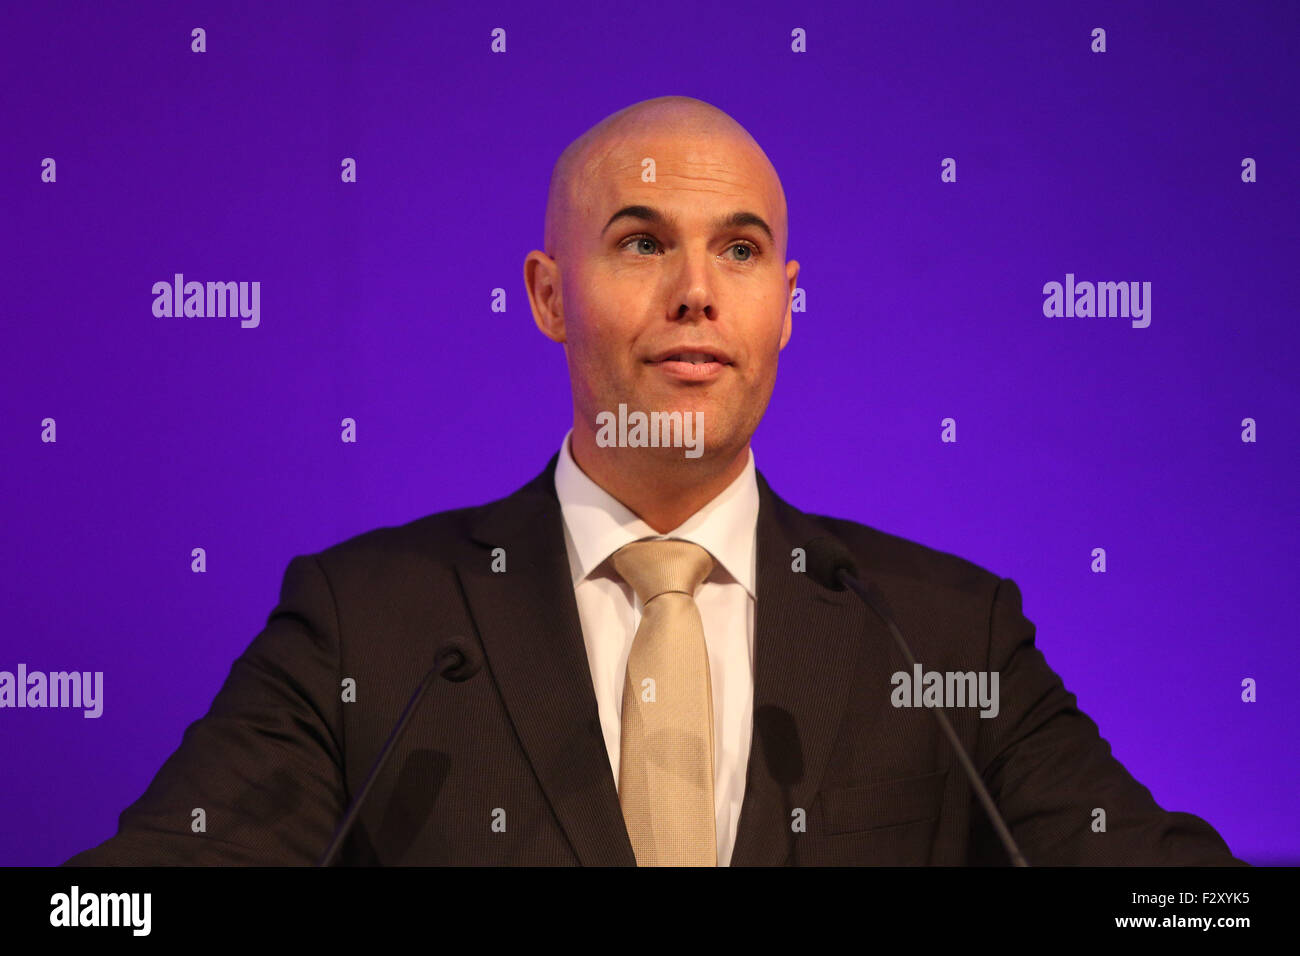 Doncaster, South Yorkshire, UK. 25th September, 2015. Jeremy Van Klaveren, Dutch MP as a member of the Party for Freedom, speaks at the UKIP National Conference in Doncaster South Yorkshire, UK. 25th September 2015. The party's annual conference was the stage for the unveiling of a new campaign force called 'Leave EU'. Consisting of pressure groups and think tanks with thousands of activists between them it will aim to end the UK’s ties with Brussels.  Ian Hinchliffe / /Alamy Live News Stock Photo